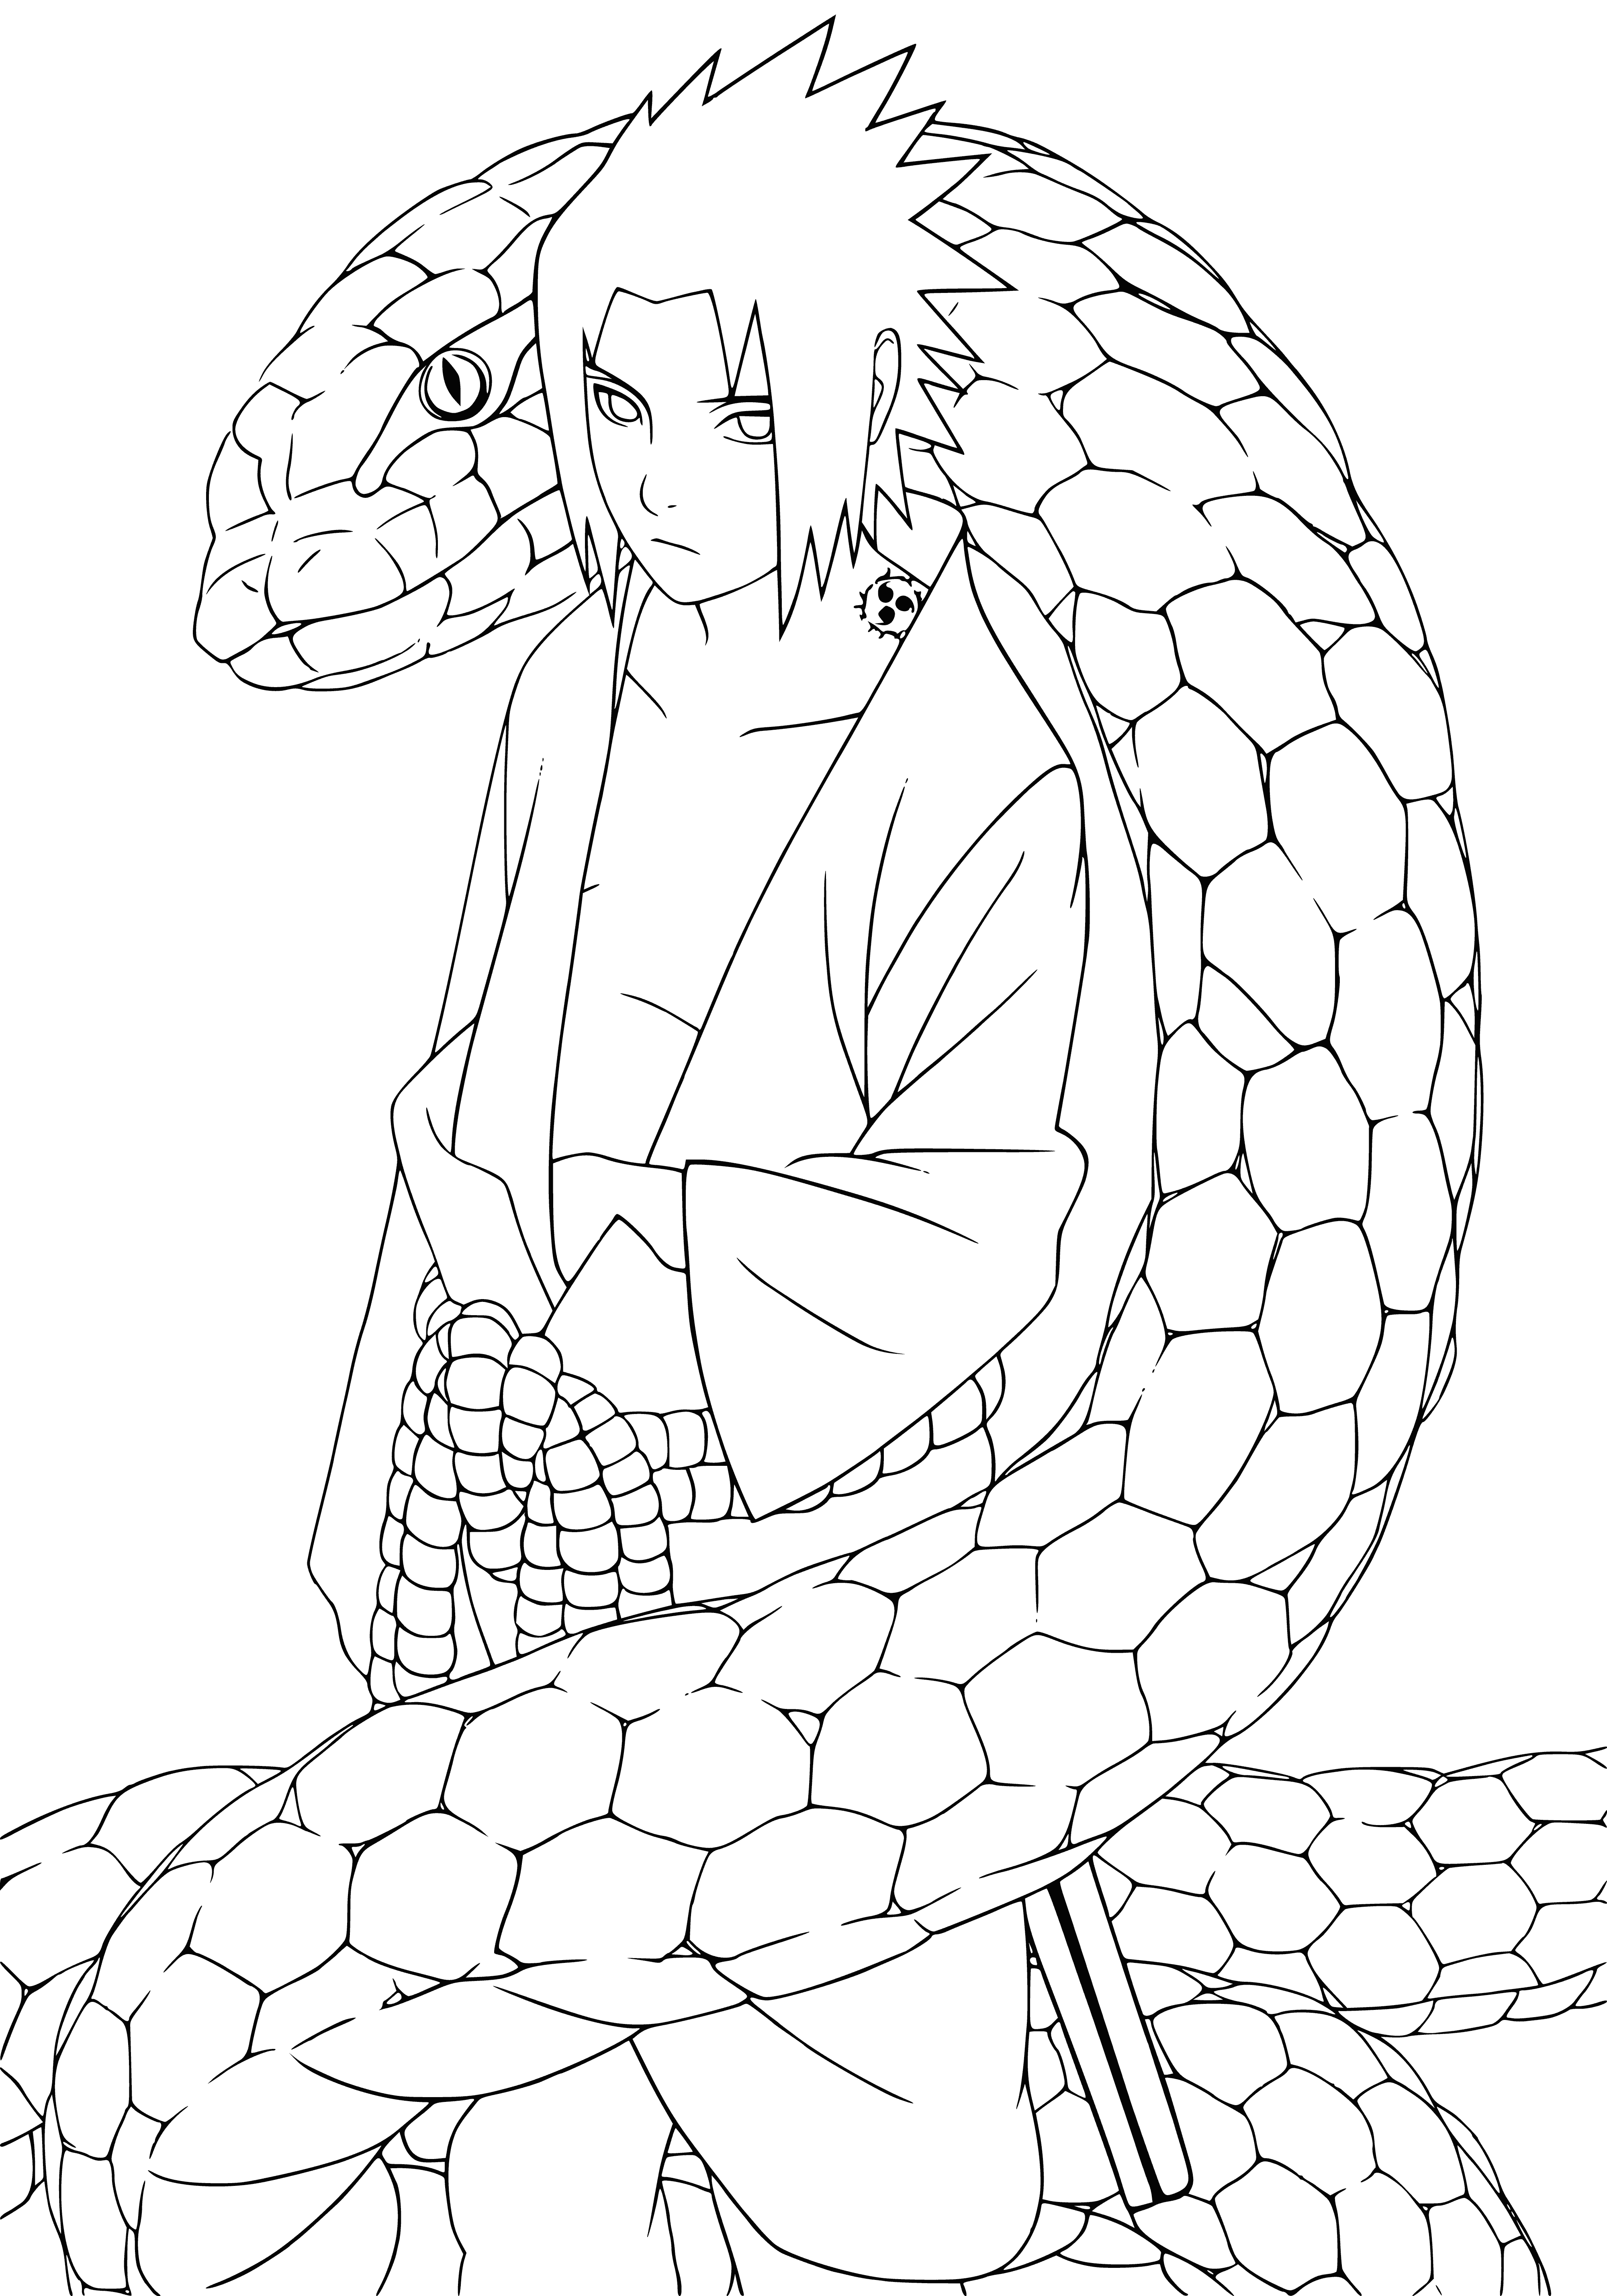 coloring page: Sasuke is a young man w/ dark hair & eyes wearing a blue & white Uchiha clan uniform. Carrying a sword & scroll.